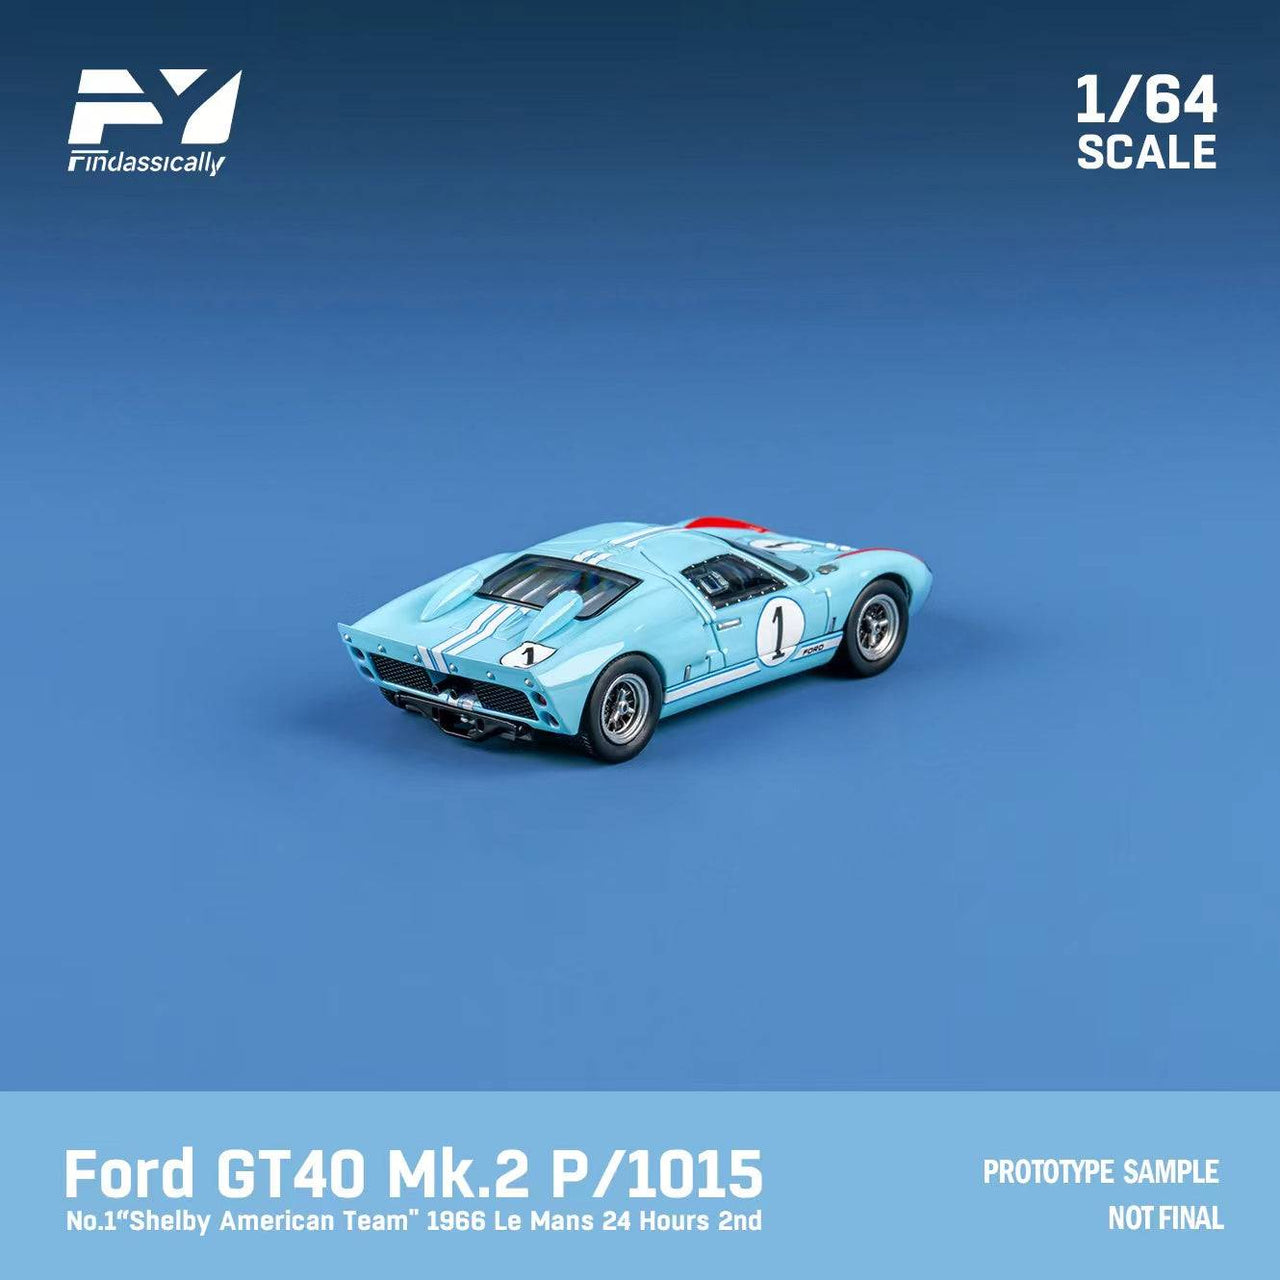 PRE-ORDER Finclassically 1:64 Ford GT40 MK II LeMans